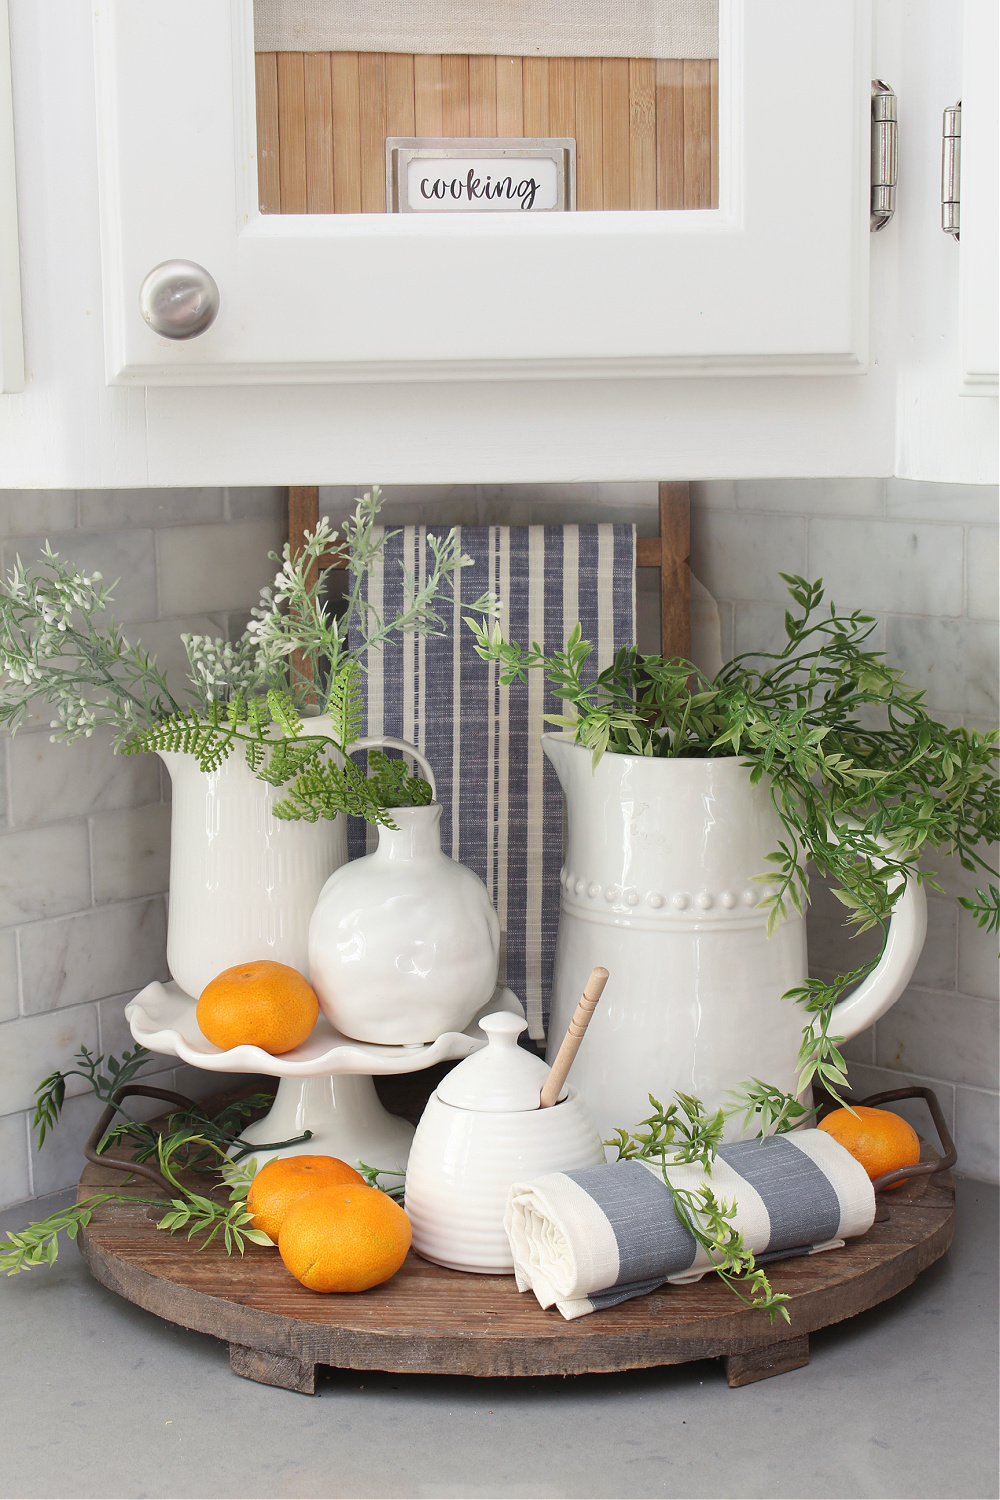 A summer vignette of a kitchen with white pottery and pops of blue and orange.